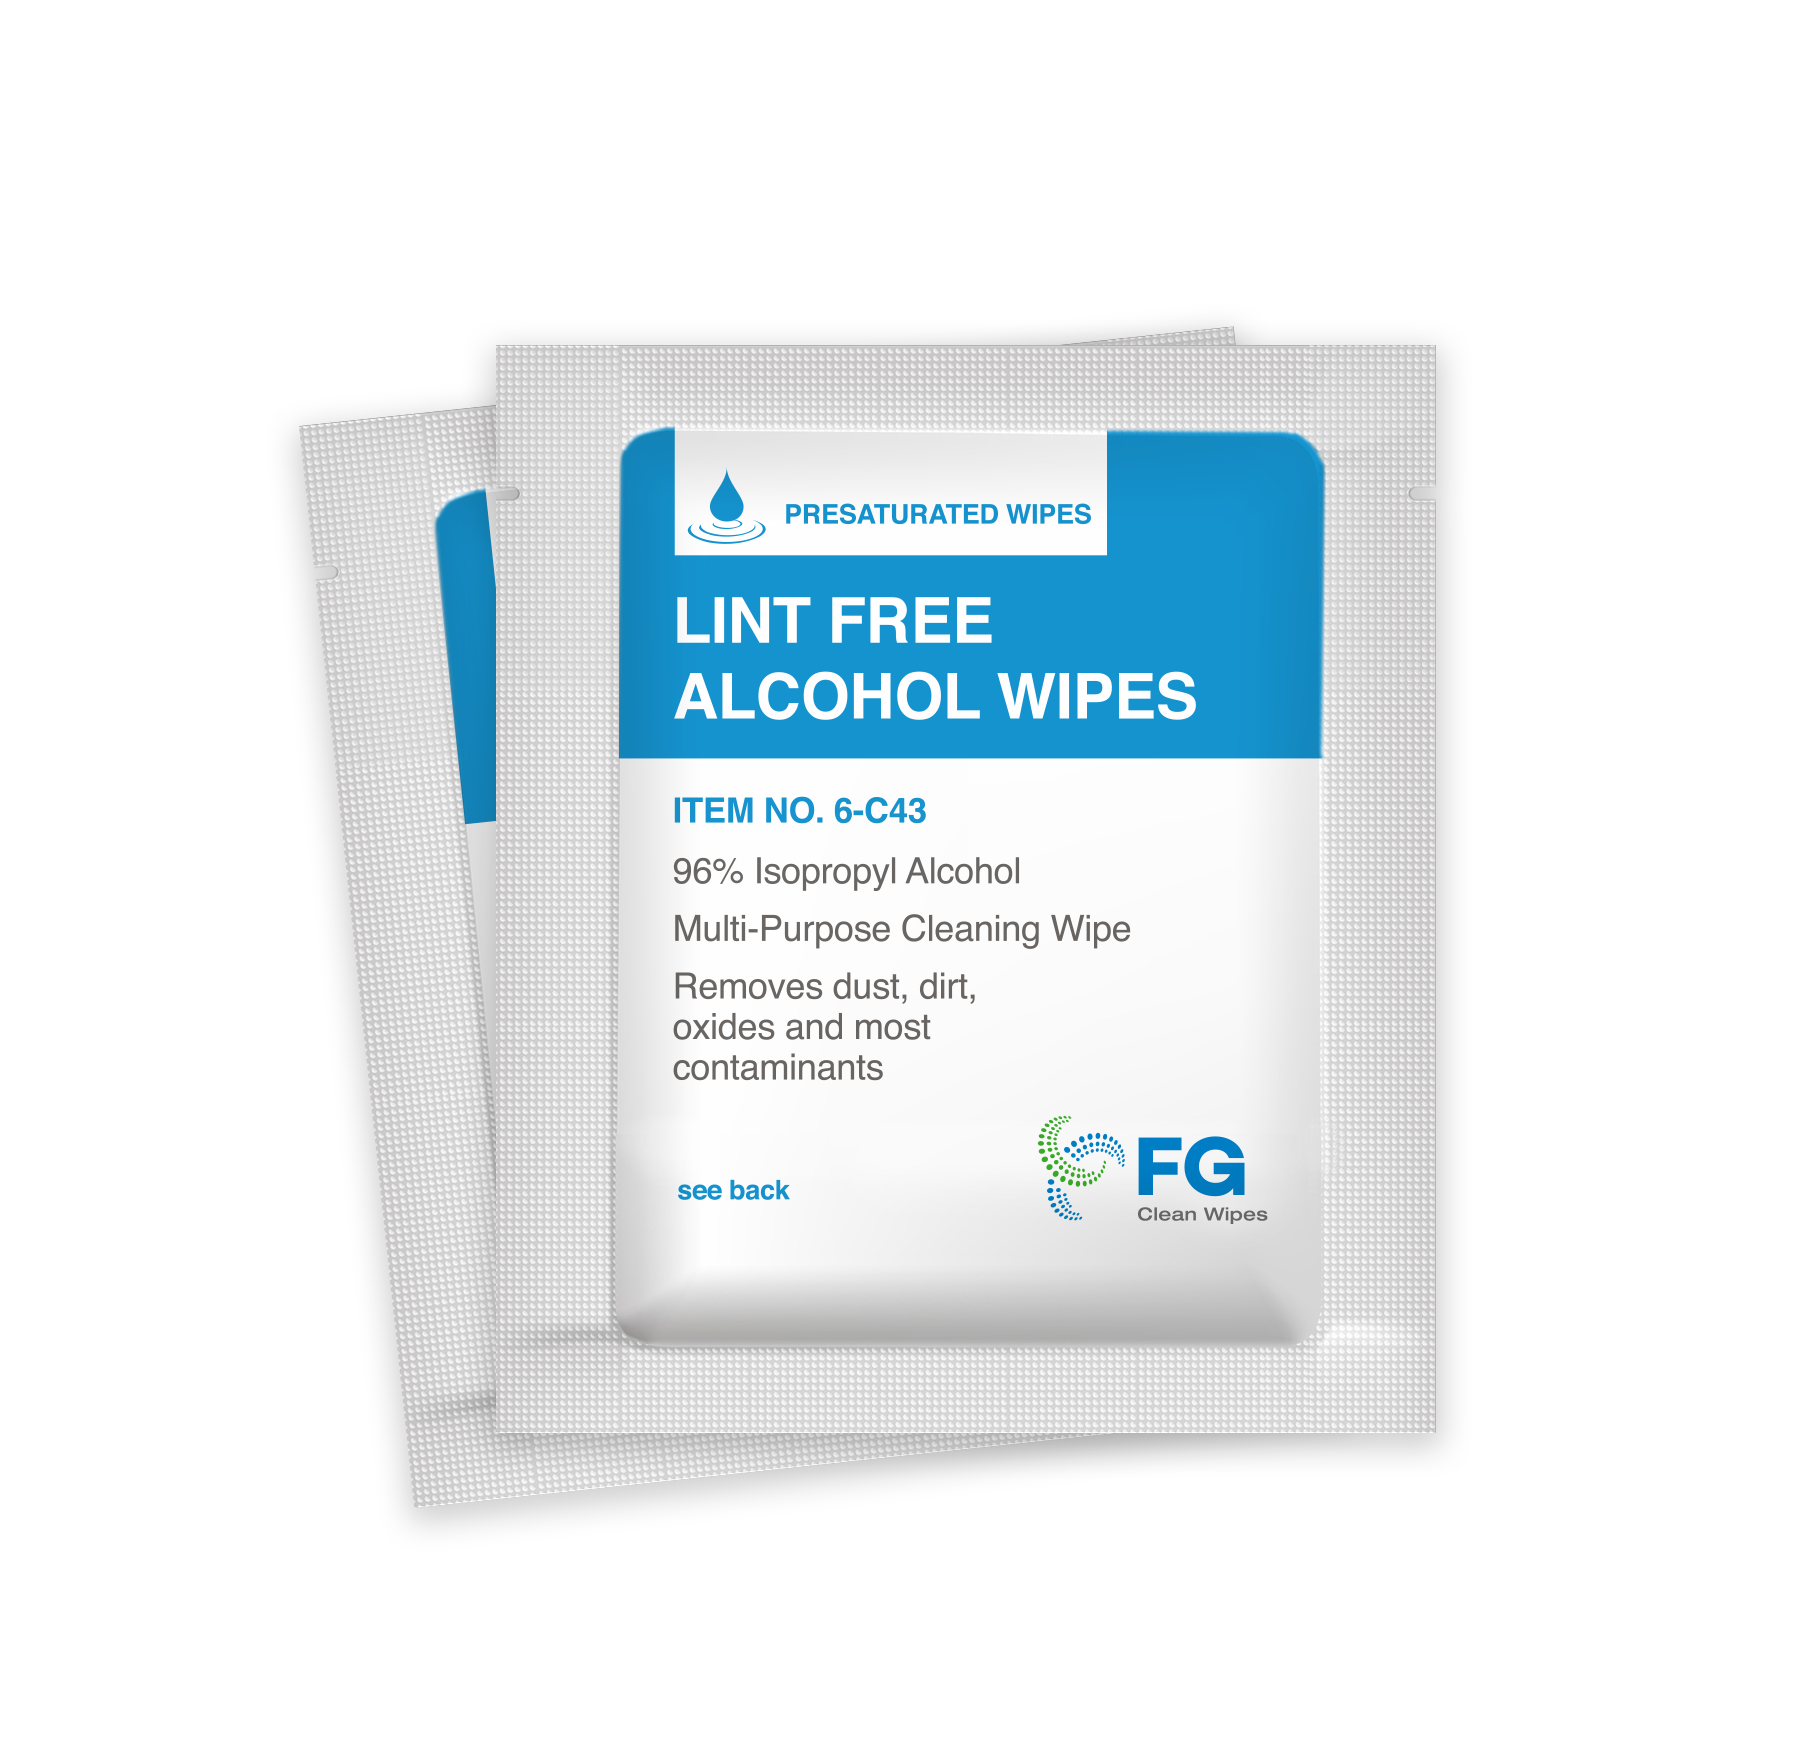 Alcohol Wipes - FG Clean Wipes